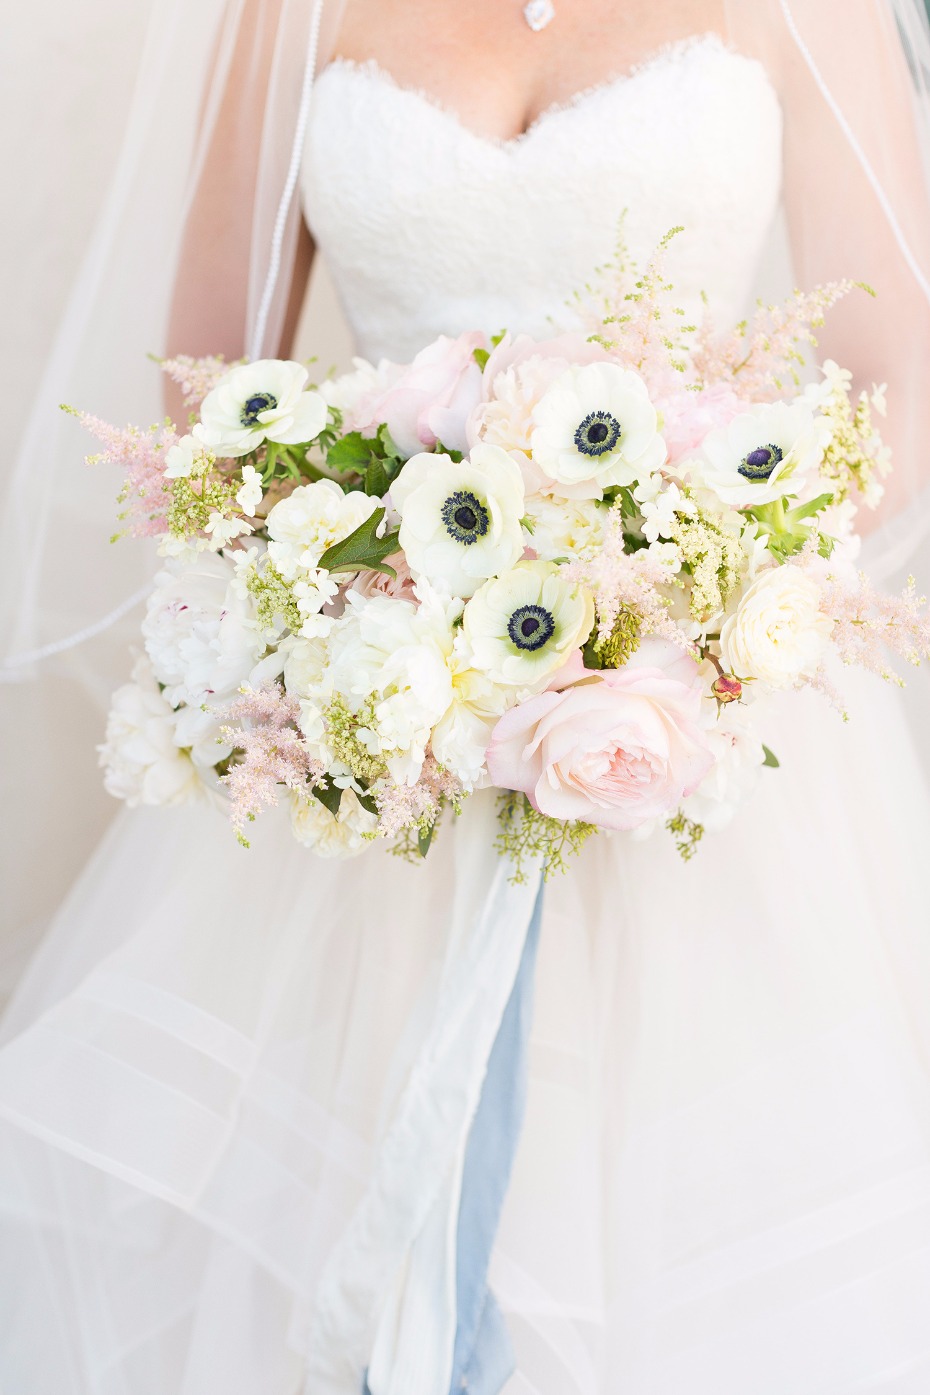 White and blush bouquet with blue ribbon